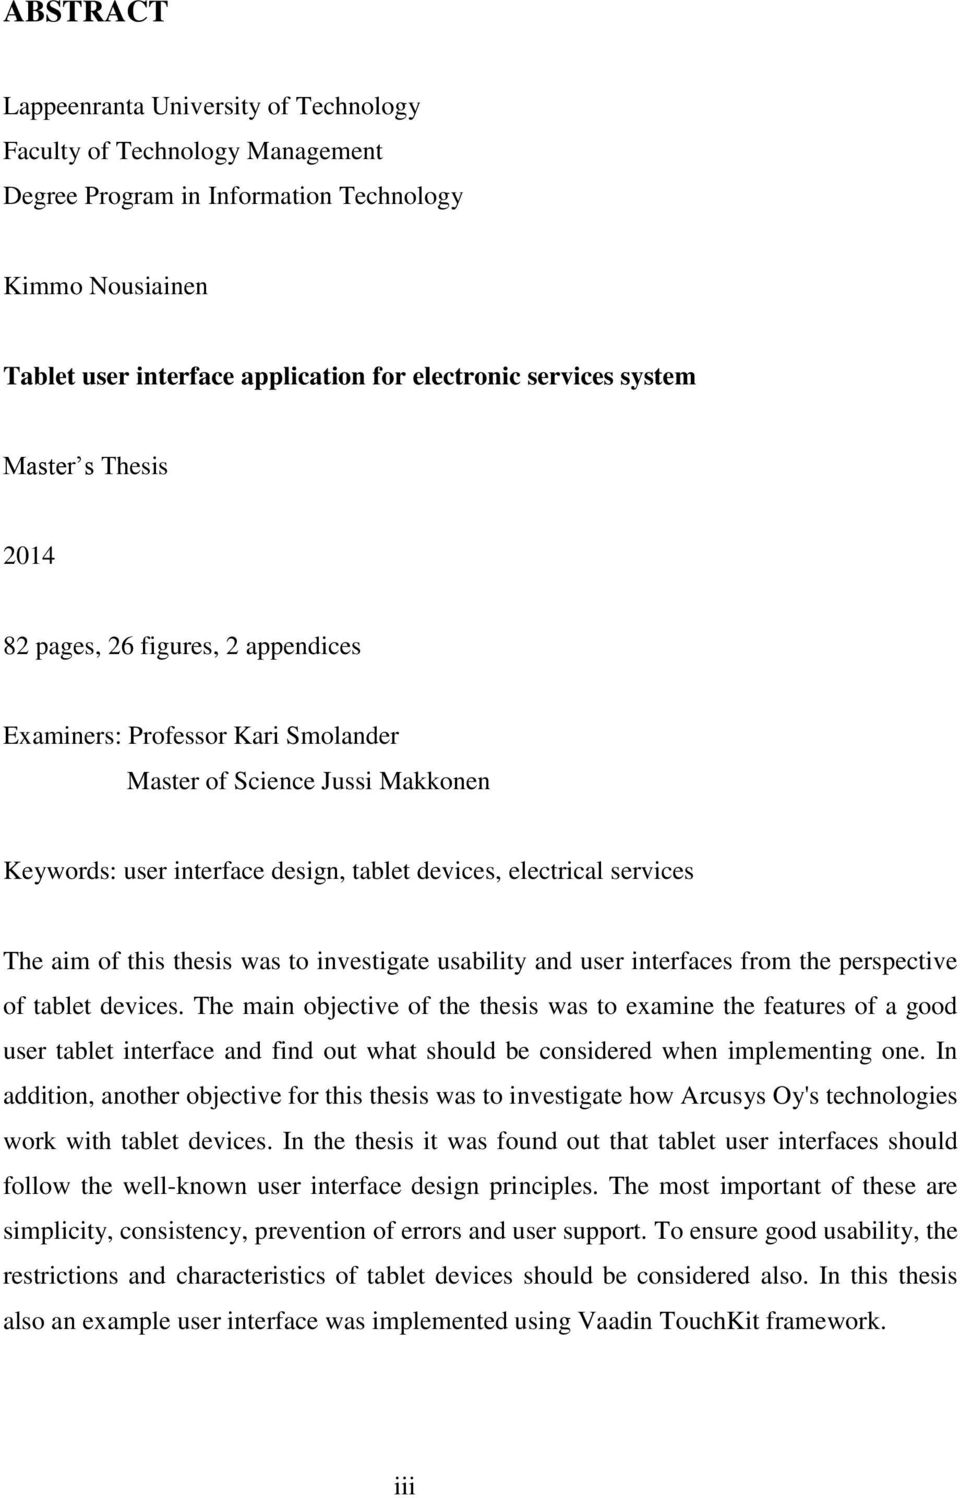 services The aim of this thesis was to investigate usability and user interfaces from the perspective of tablet devices.